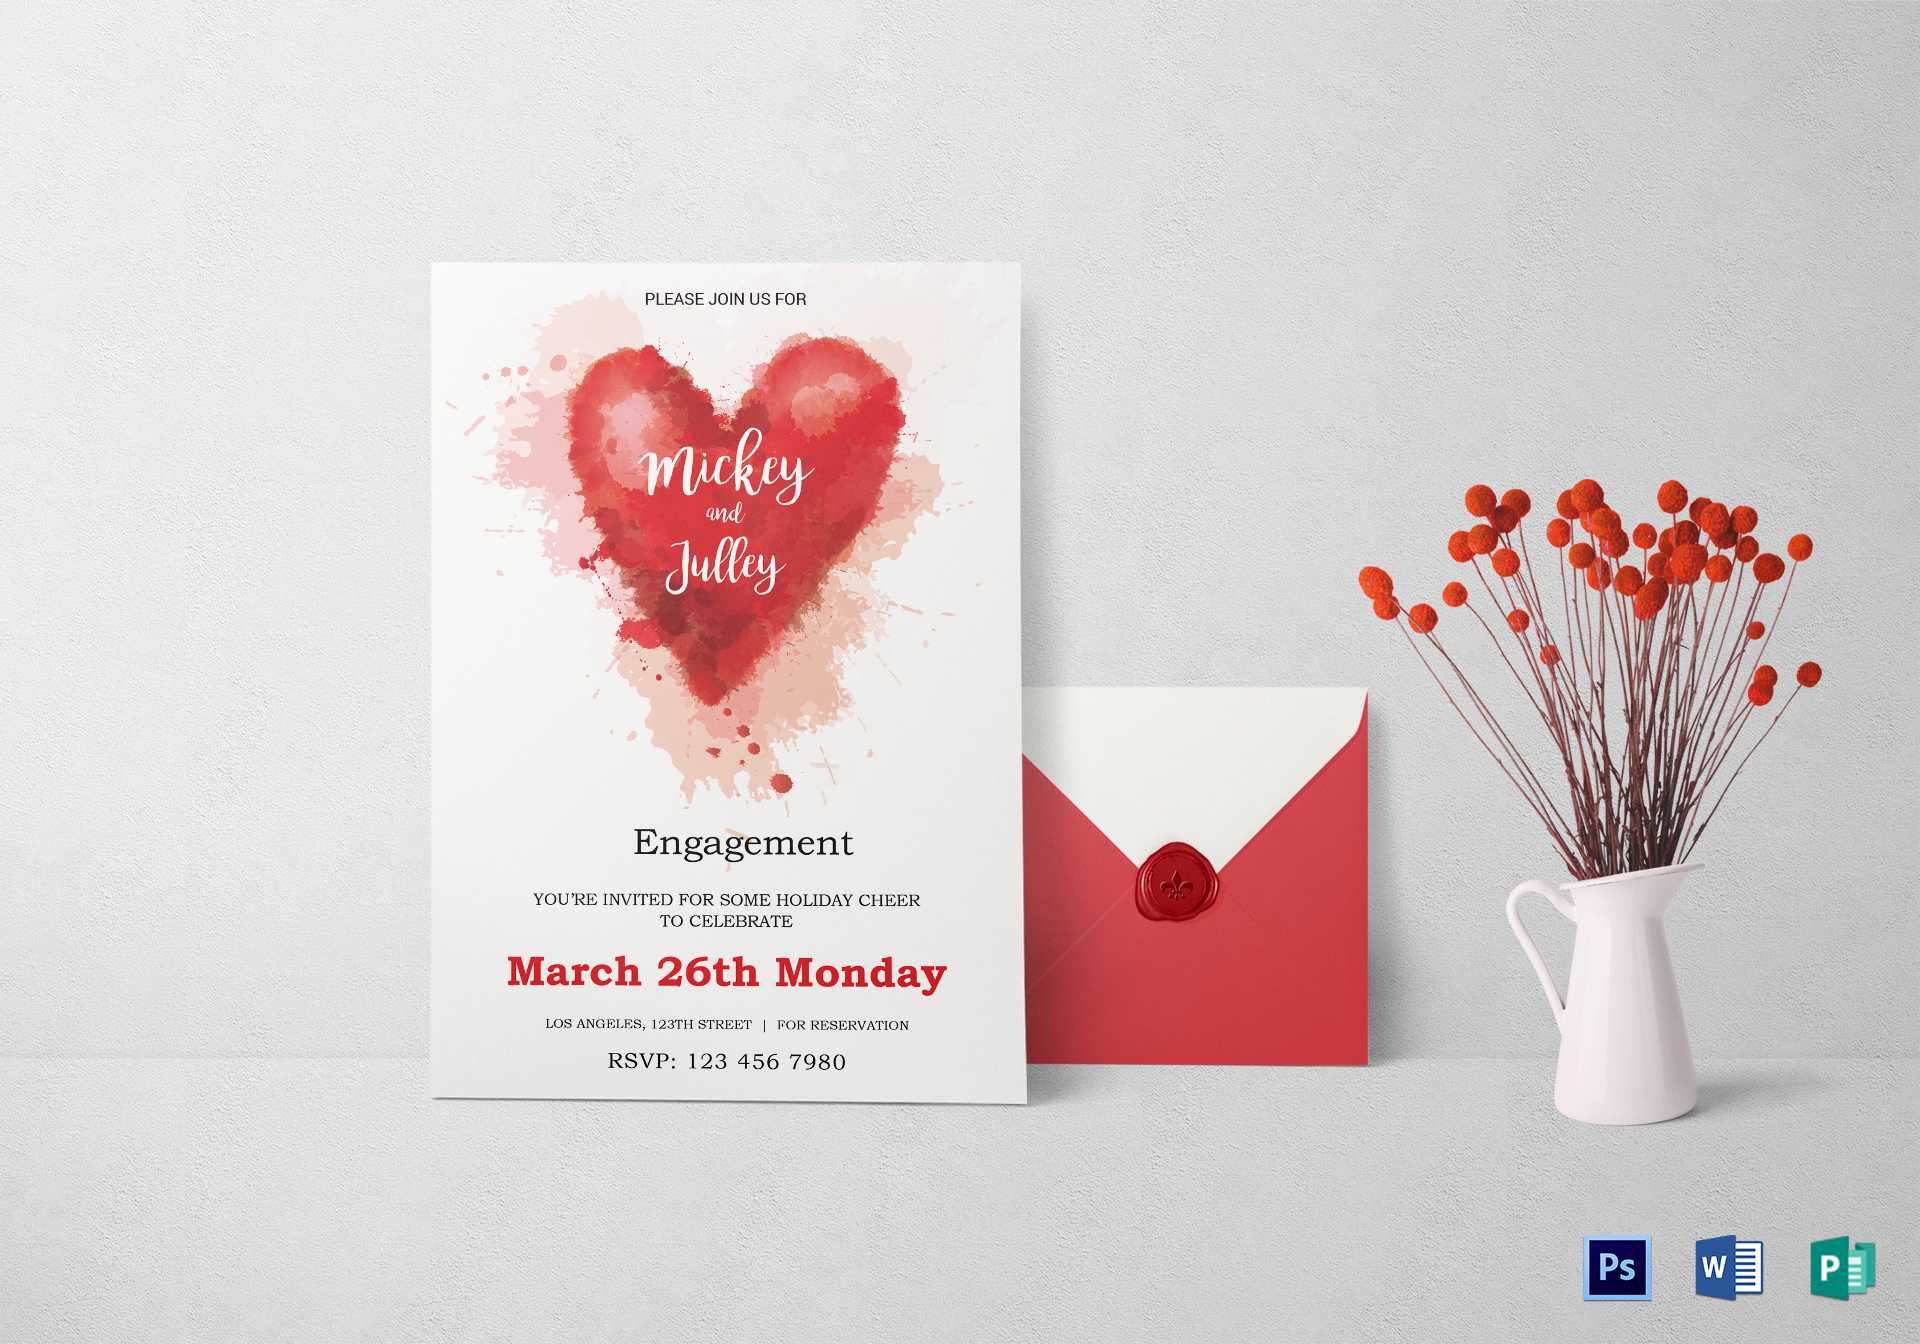 Colorful Engagement Invitation Card Template In Engagement Invitation Card Template